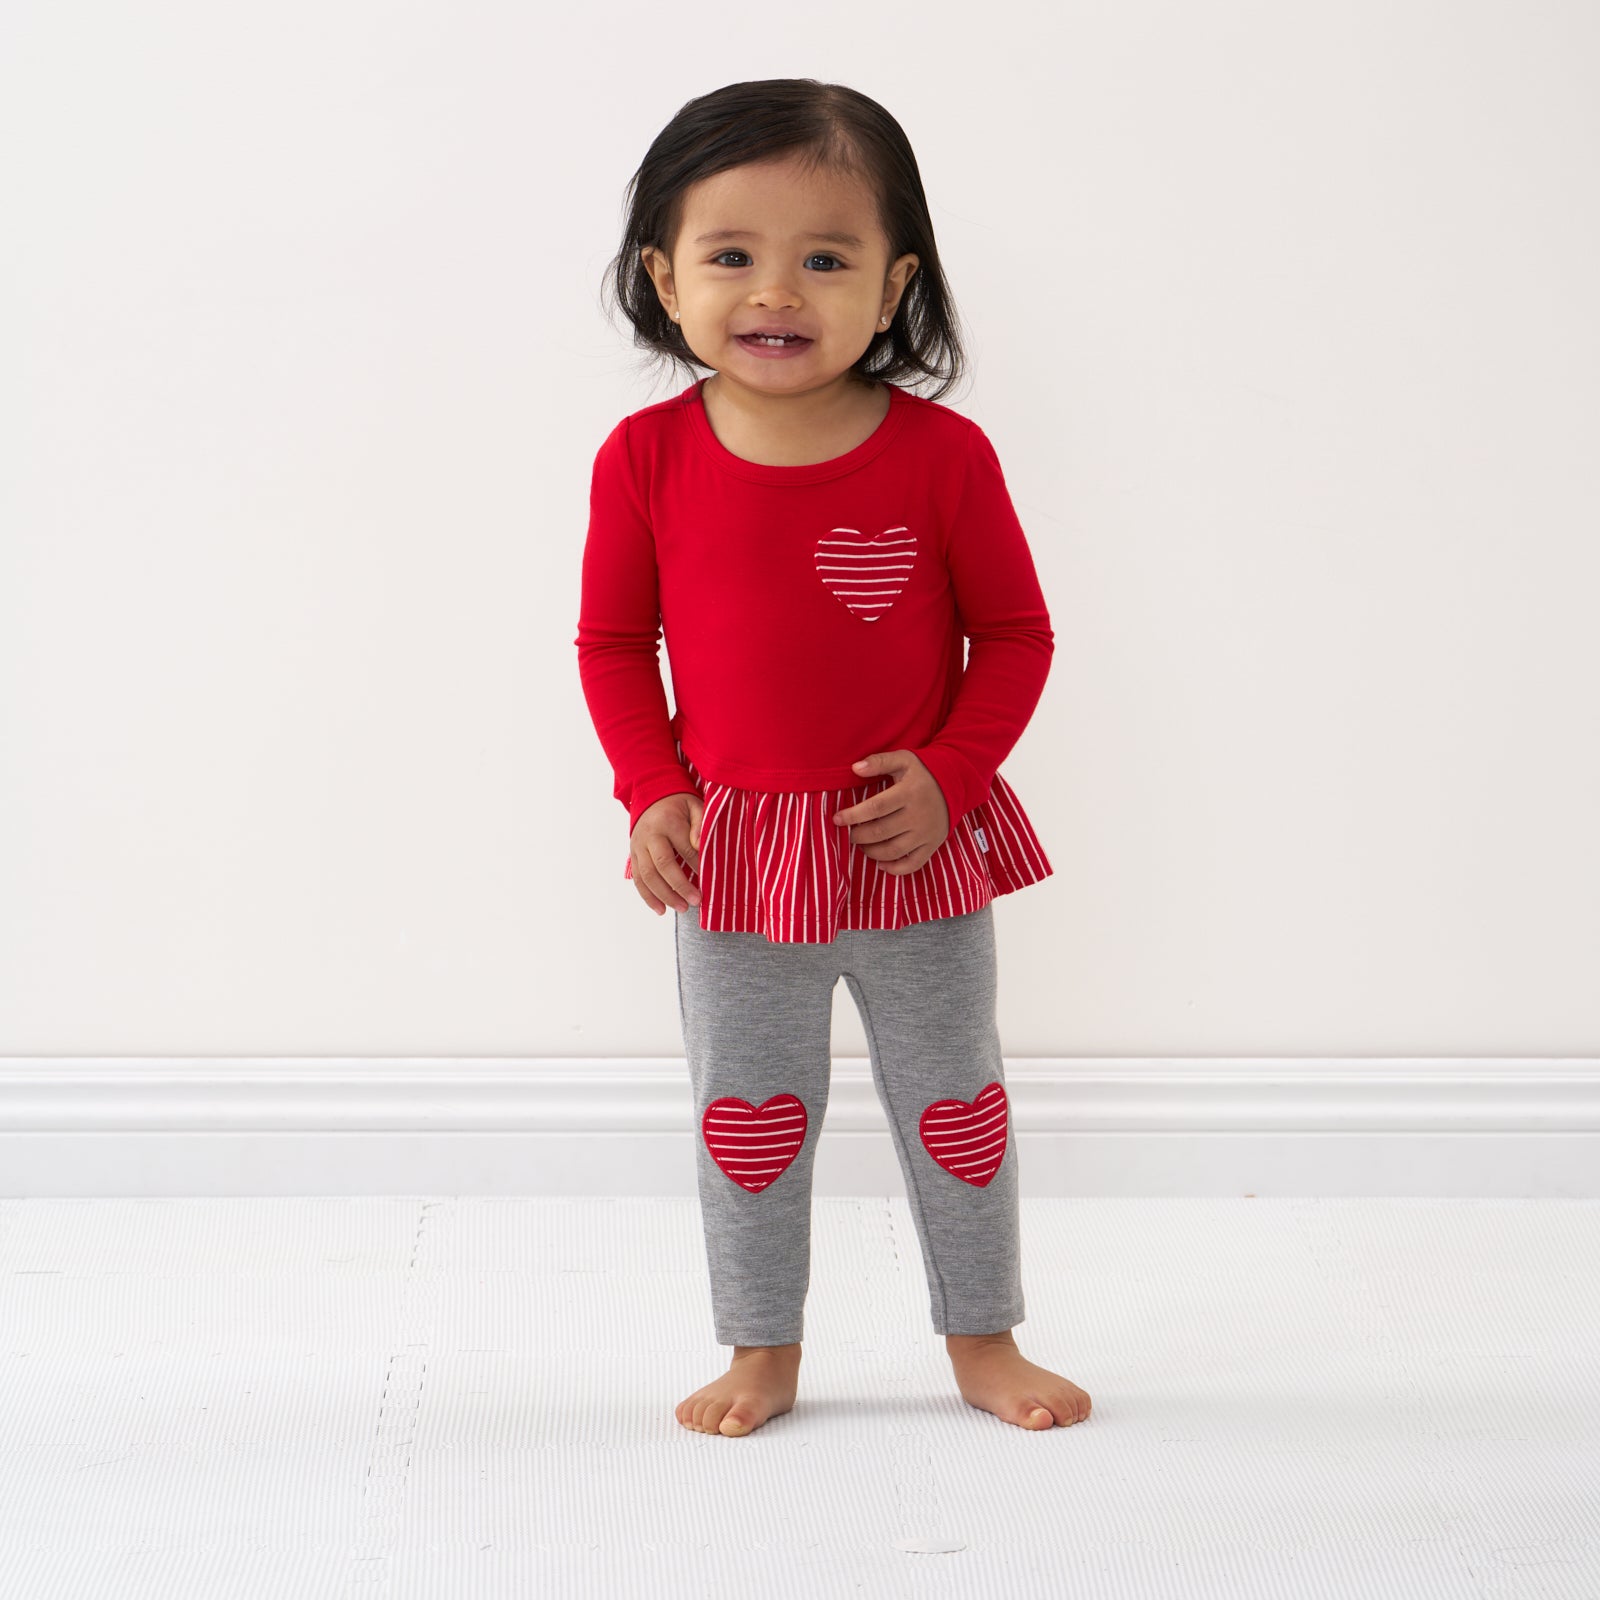 Alternate image of a child wearing a Candy Red peplum tee and coordinating heart patch leggings